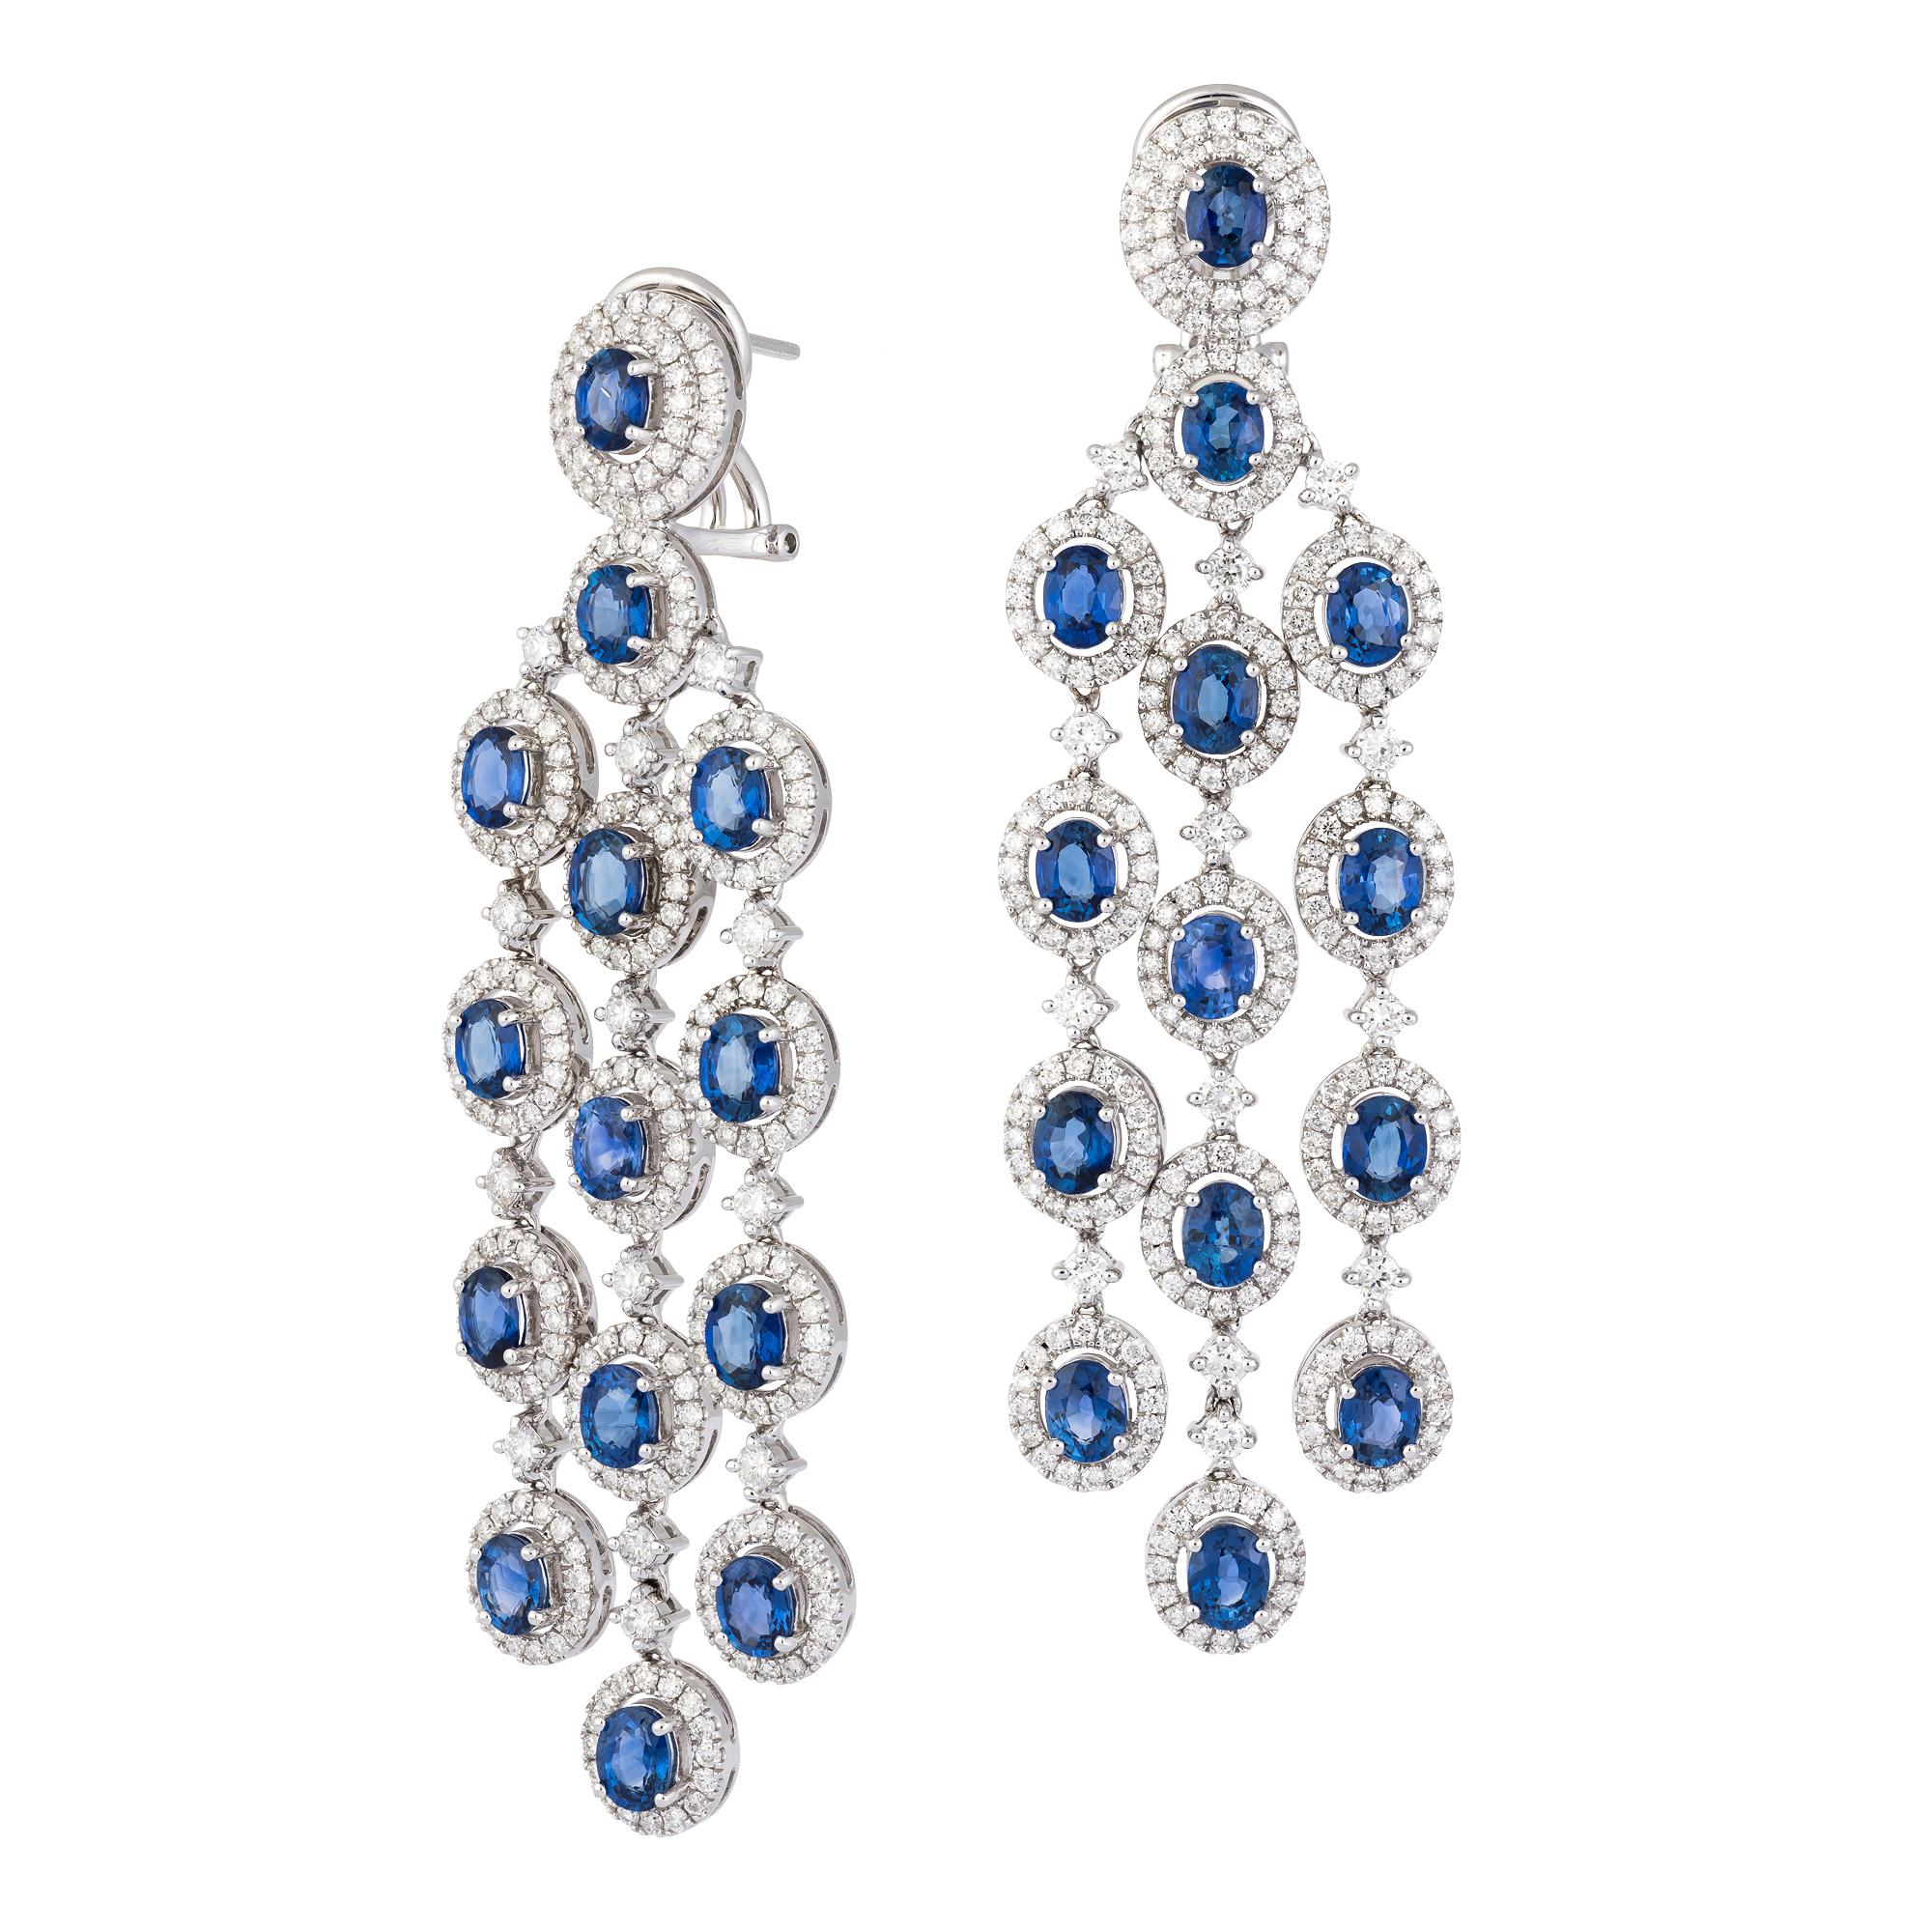 The Following Items we are offering are a Rare Important Radiant 18KT Gold Large Gorgeous Fancy Sapphire and Diamond Exquisite Chandelier Earrings. Earrings are comprised of Beautiful Glittering Diamonds!!! T.C.W. Approx 13.50CTS!!! These Gorgeous